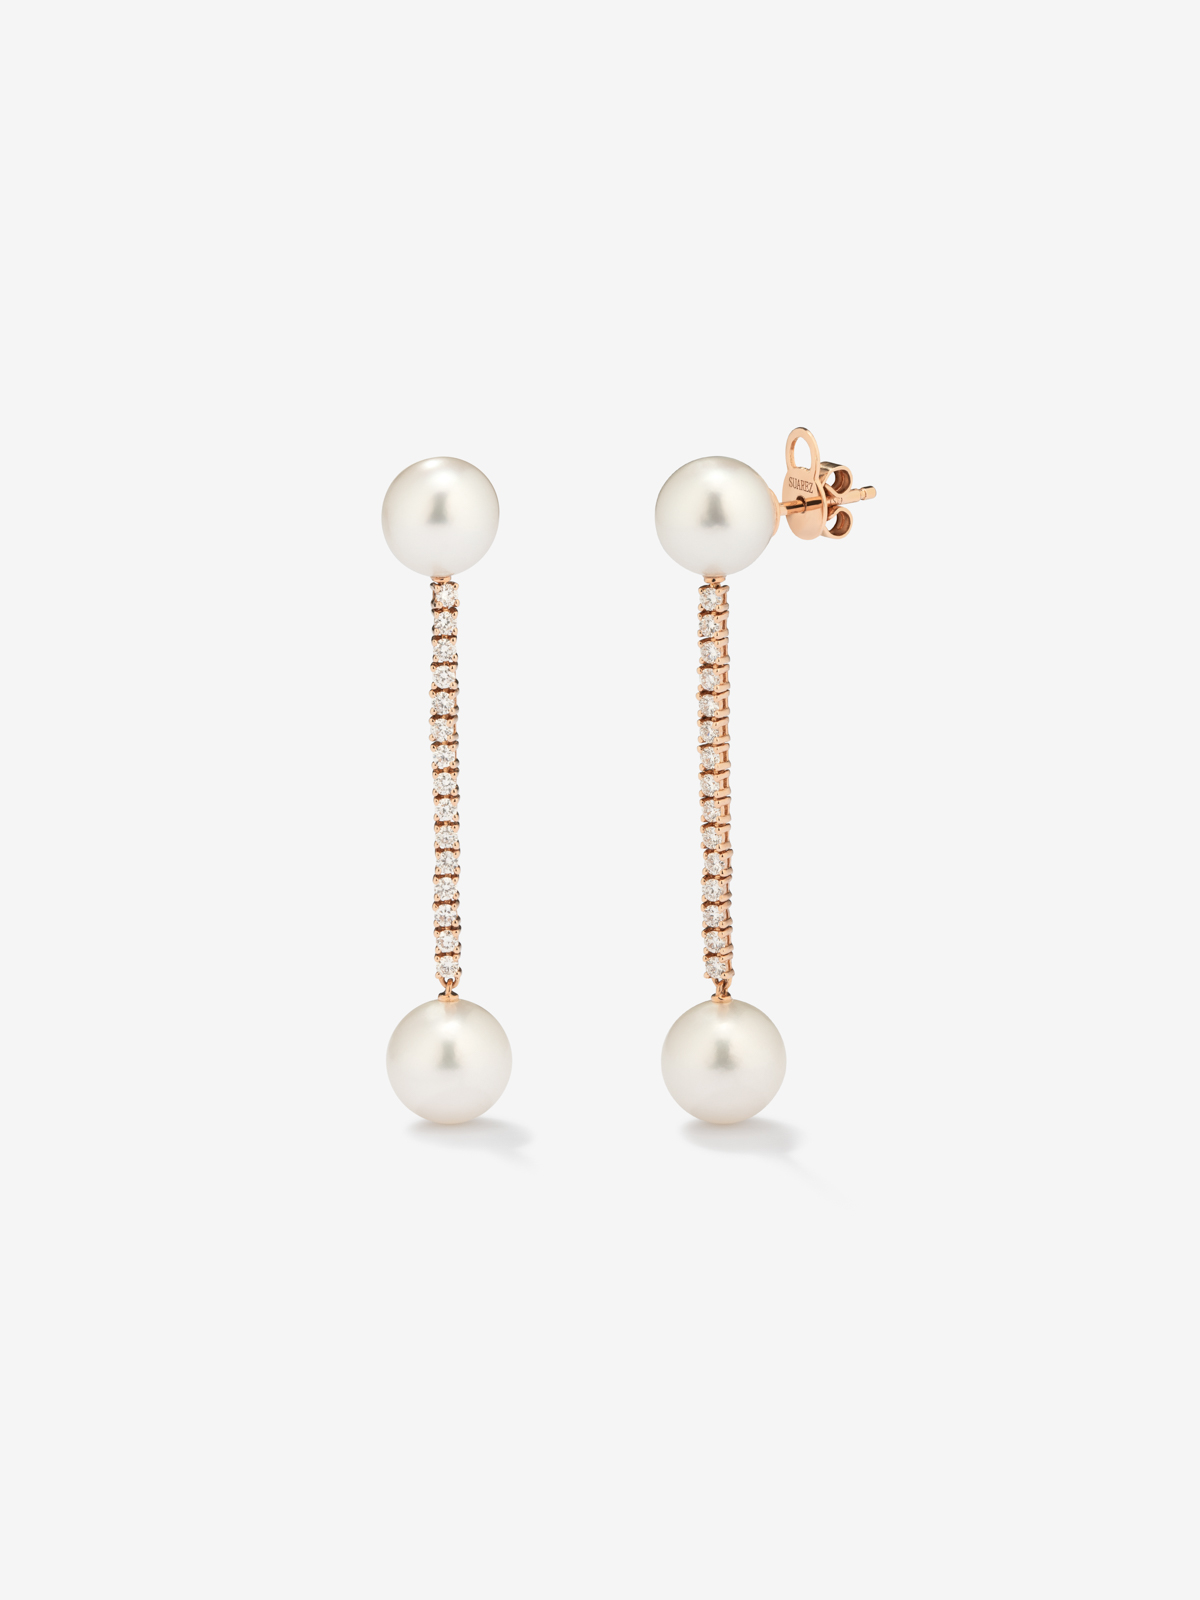 Long hanging earrings of 18K rose gold with diamond and pearl.